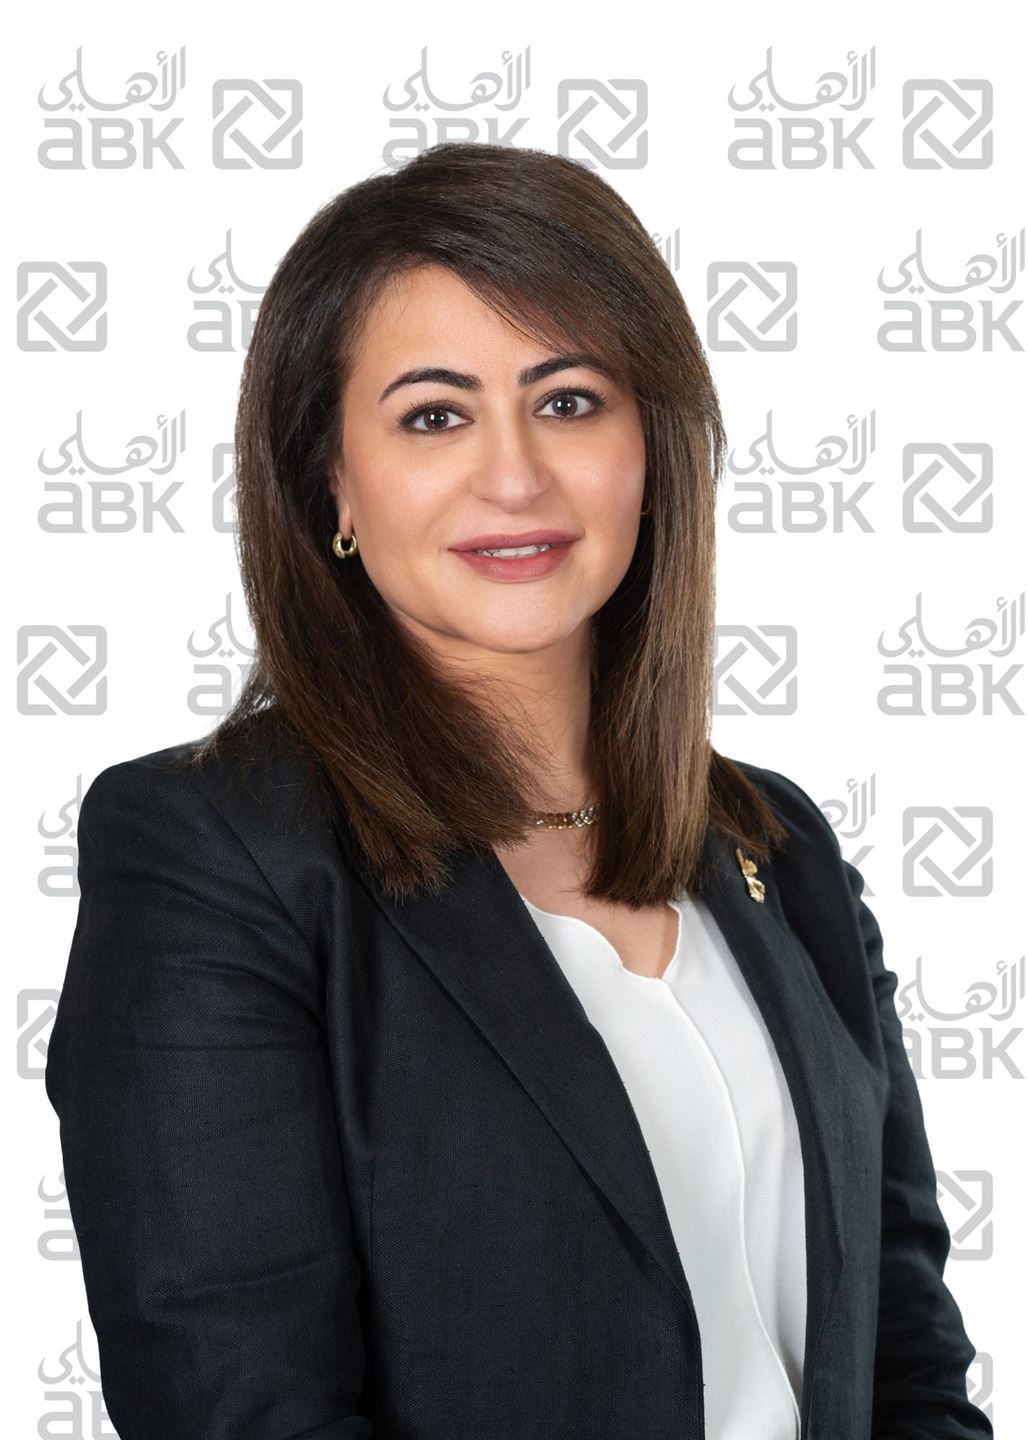 Ms. Afrah Al Arbash, ABK’s Acting General Manager for Human Resources